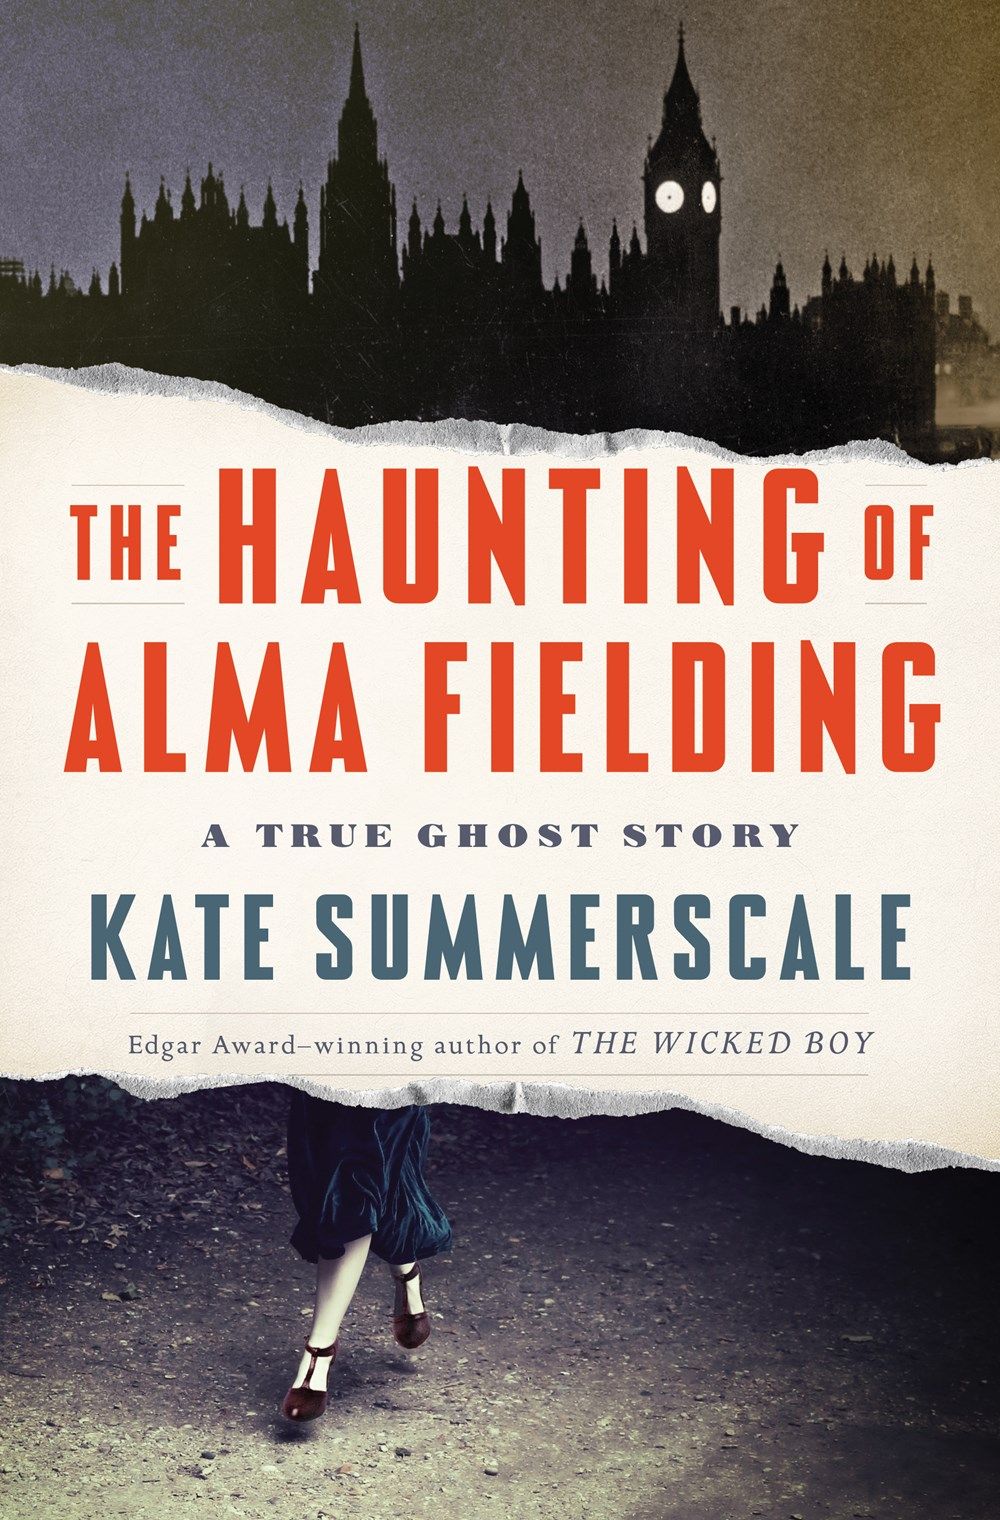 The Haunting of Alma Fielding book cover